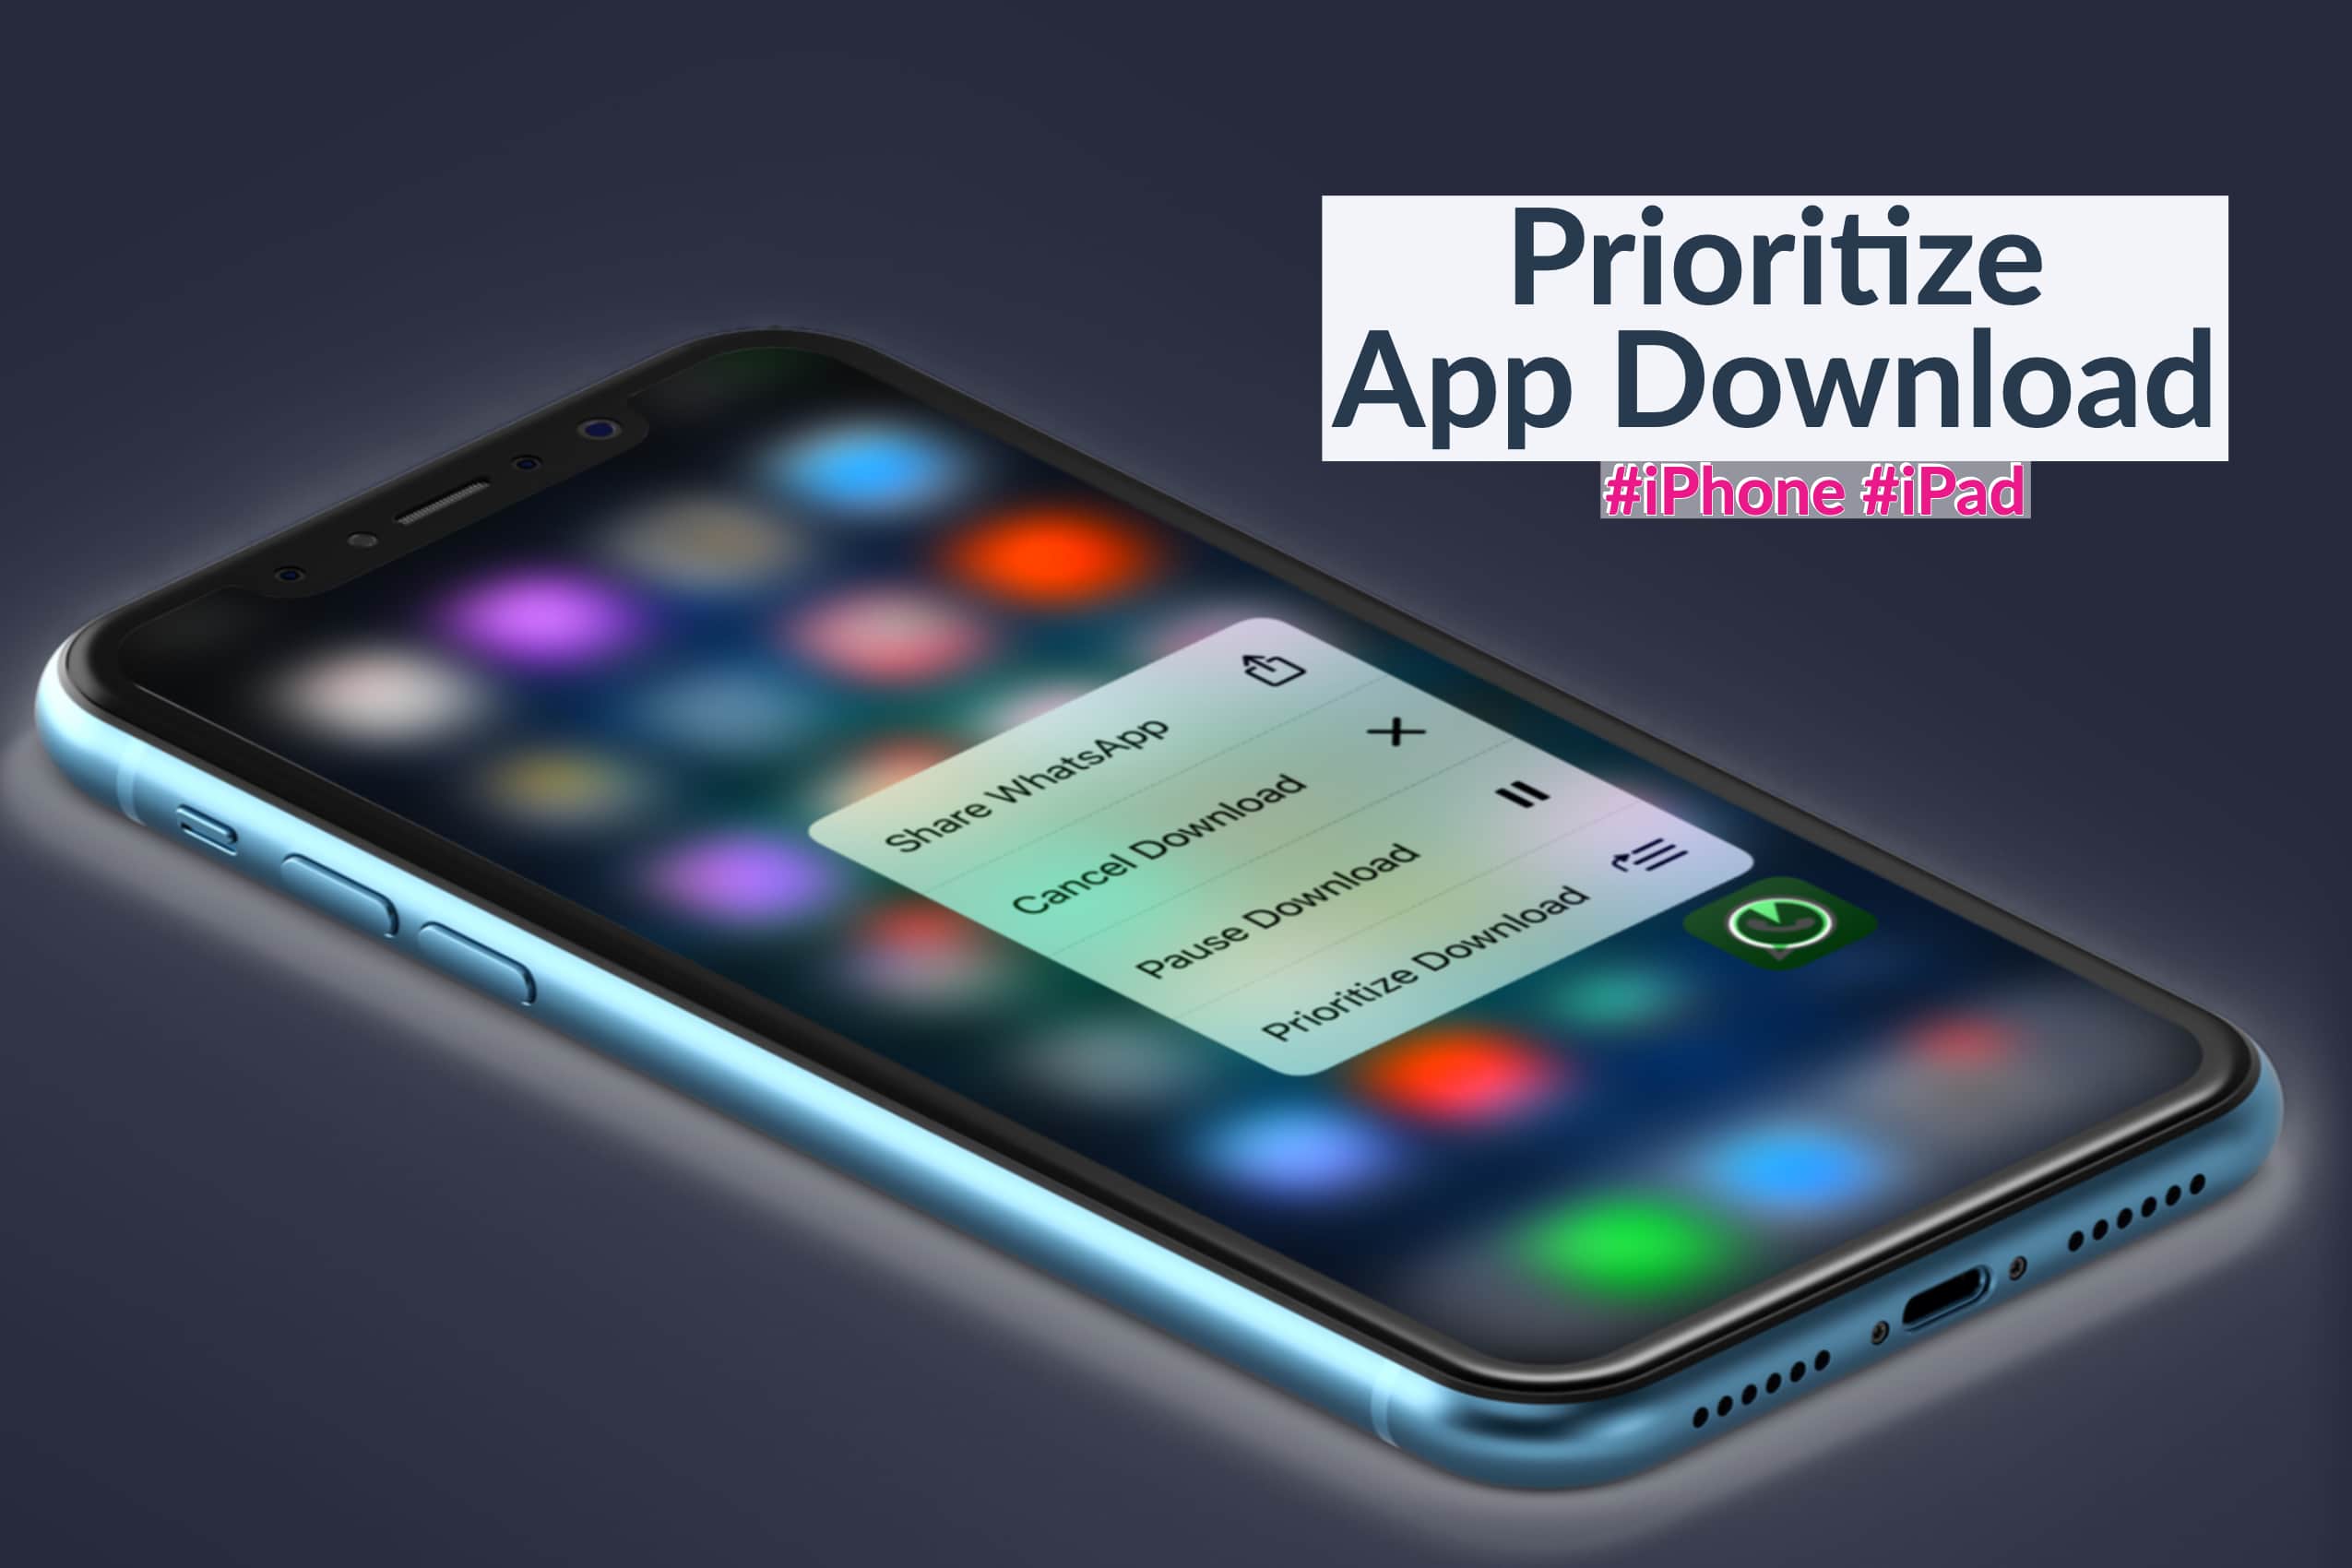 How to Prioritize App Download